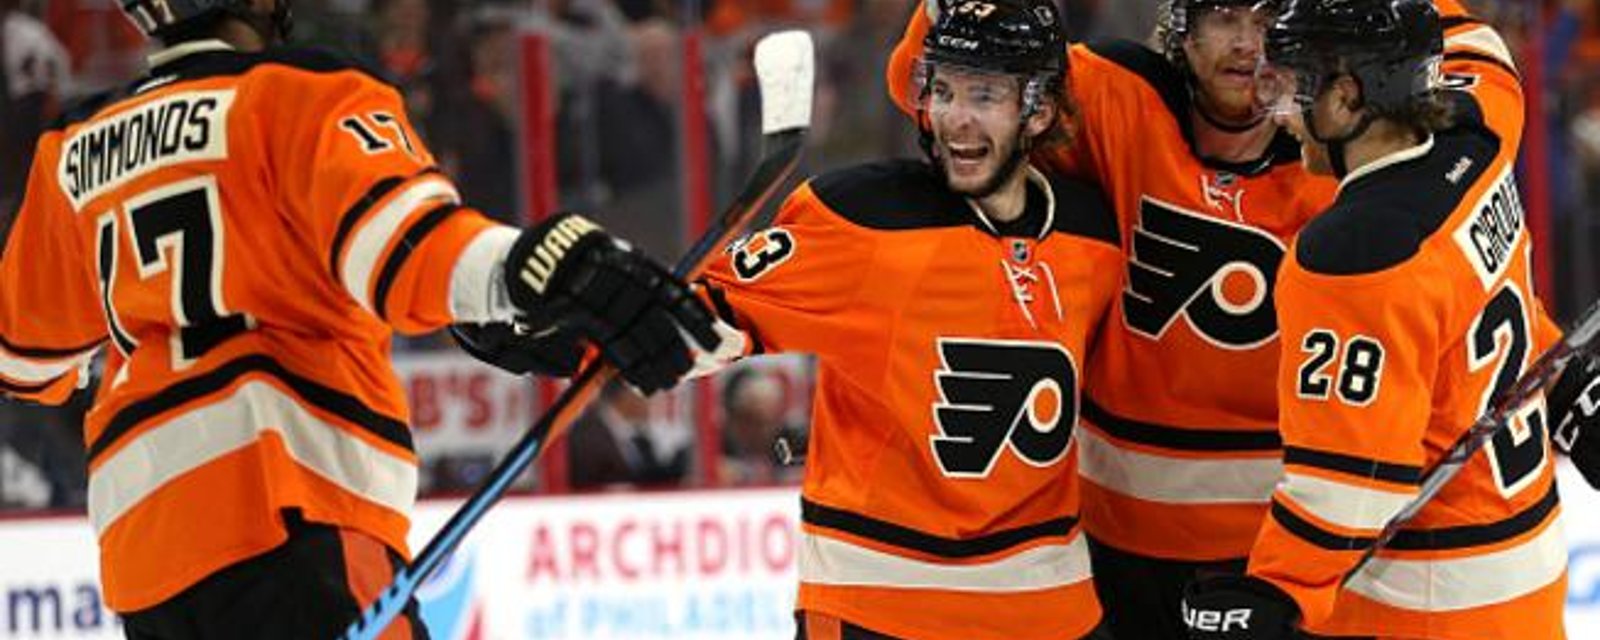 Flyers’ Fletcher already spoke with “half the teams in the league” to make trades before holiday freeze 